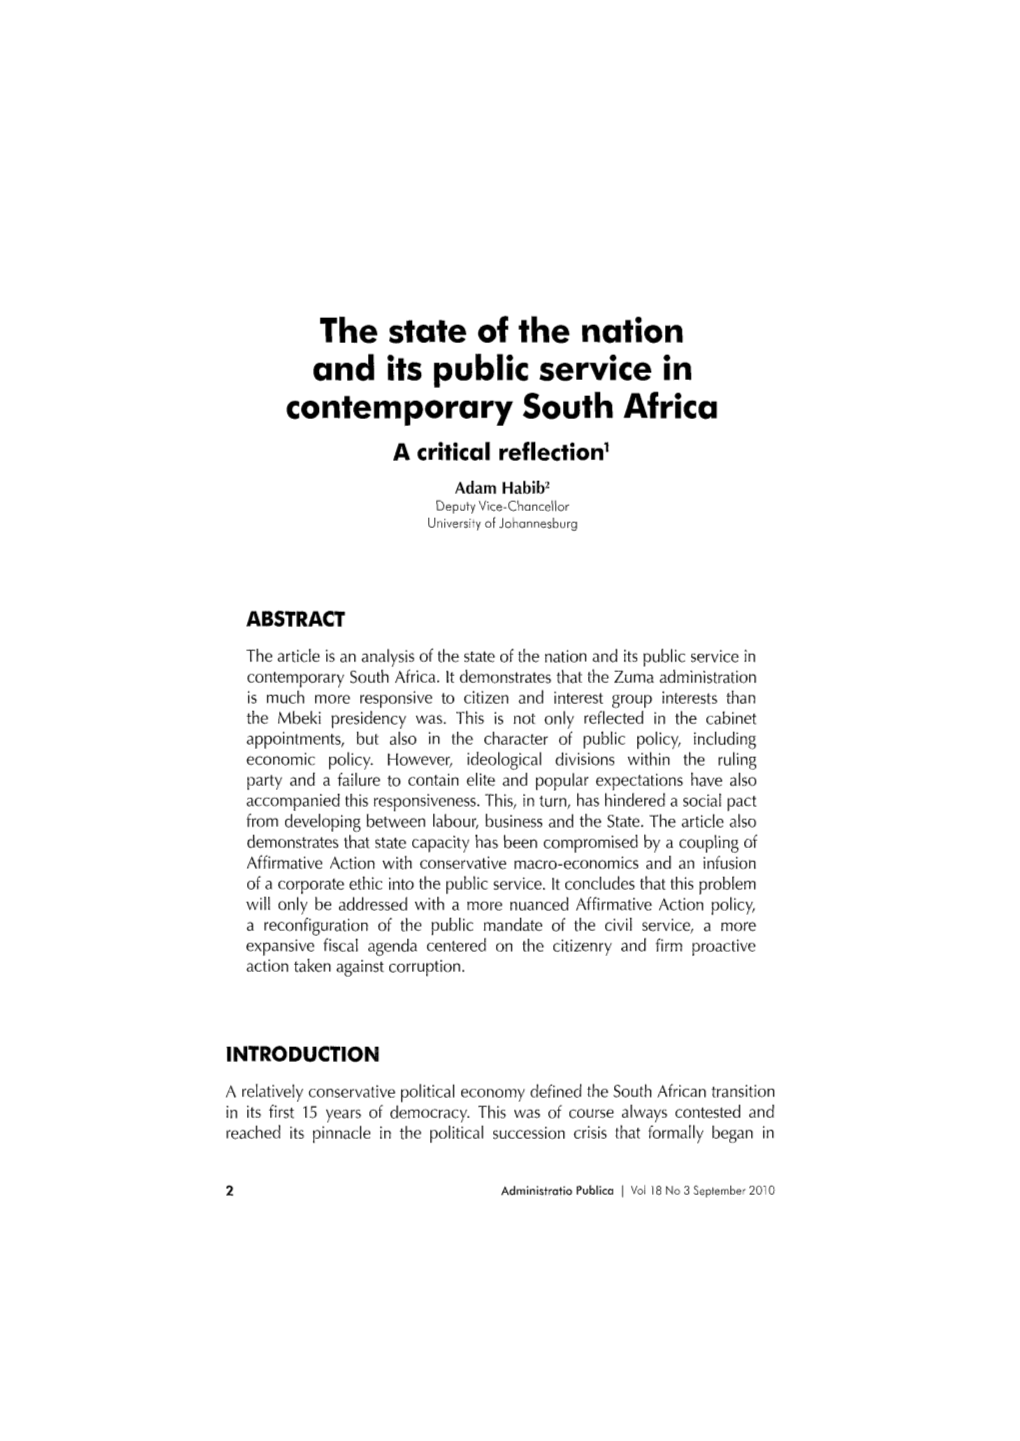 The State of the Nation and Its Public Service in Contemporary South Africa a Critical Reflection1